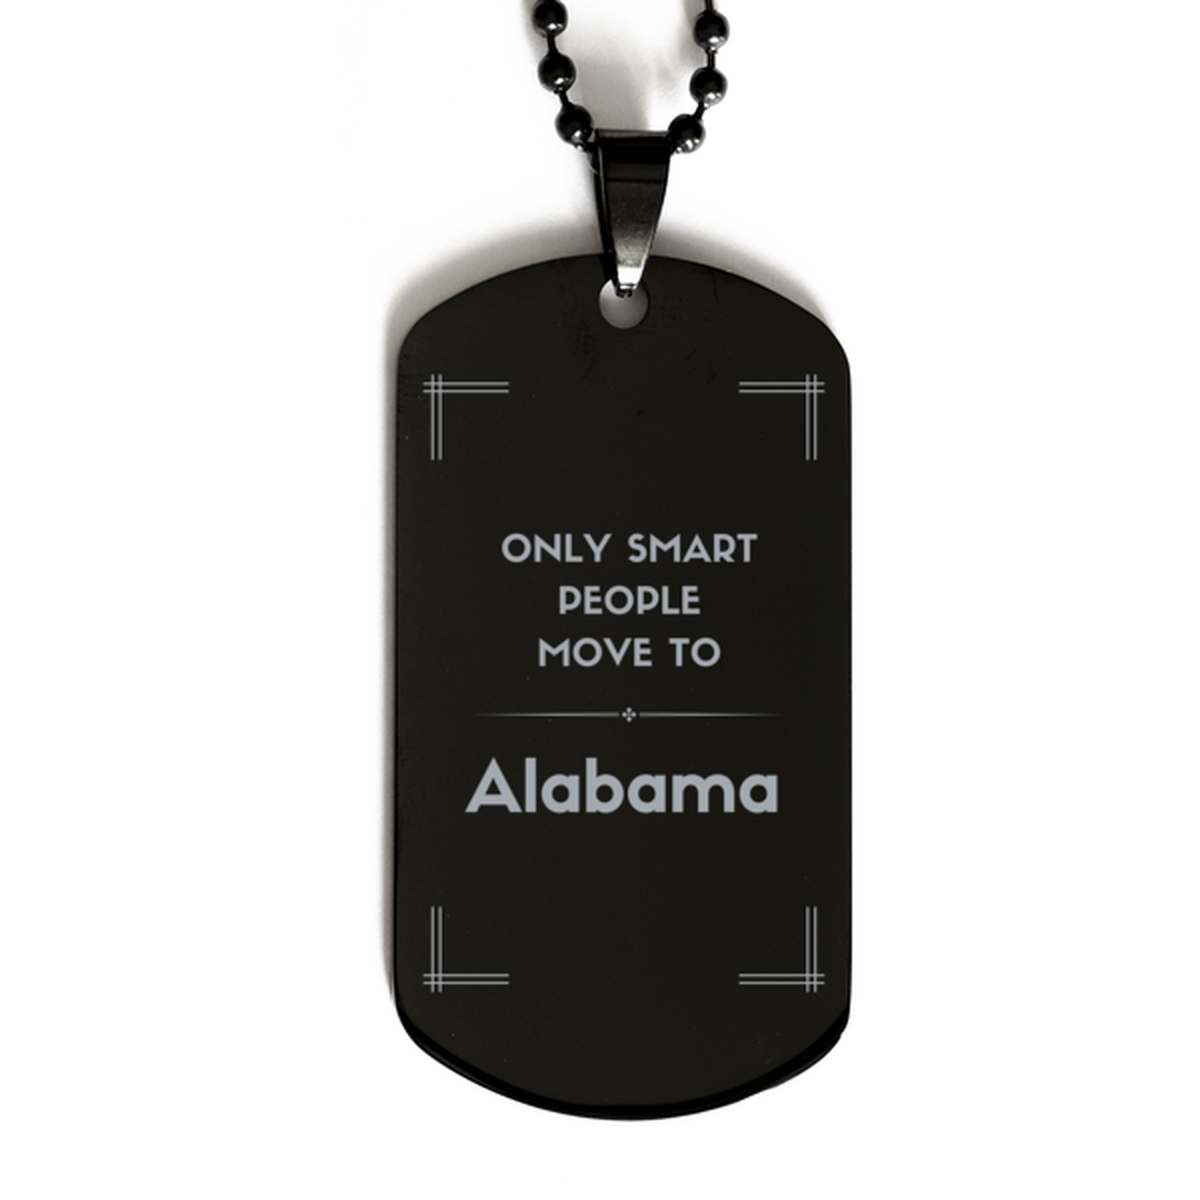 Only smart people move to Alabama Black Dog Tag, Gag Gifts For Alabama, Move to Alabama Gifts for Friends Coworker Funny Saying Quote